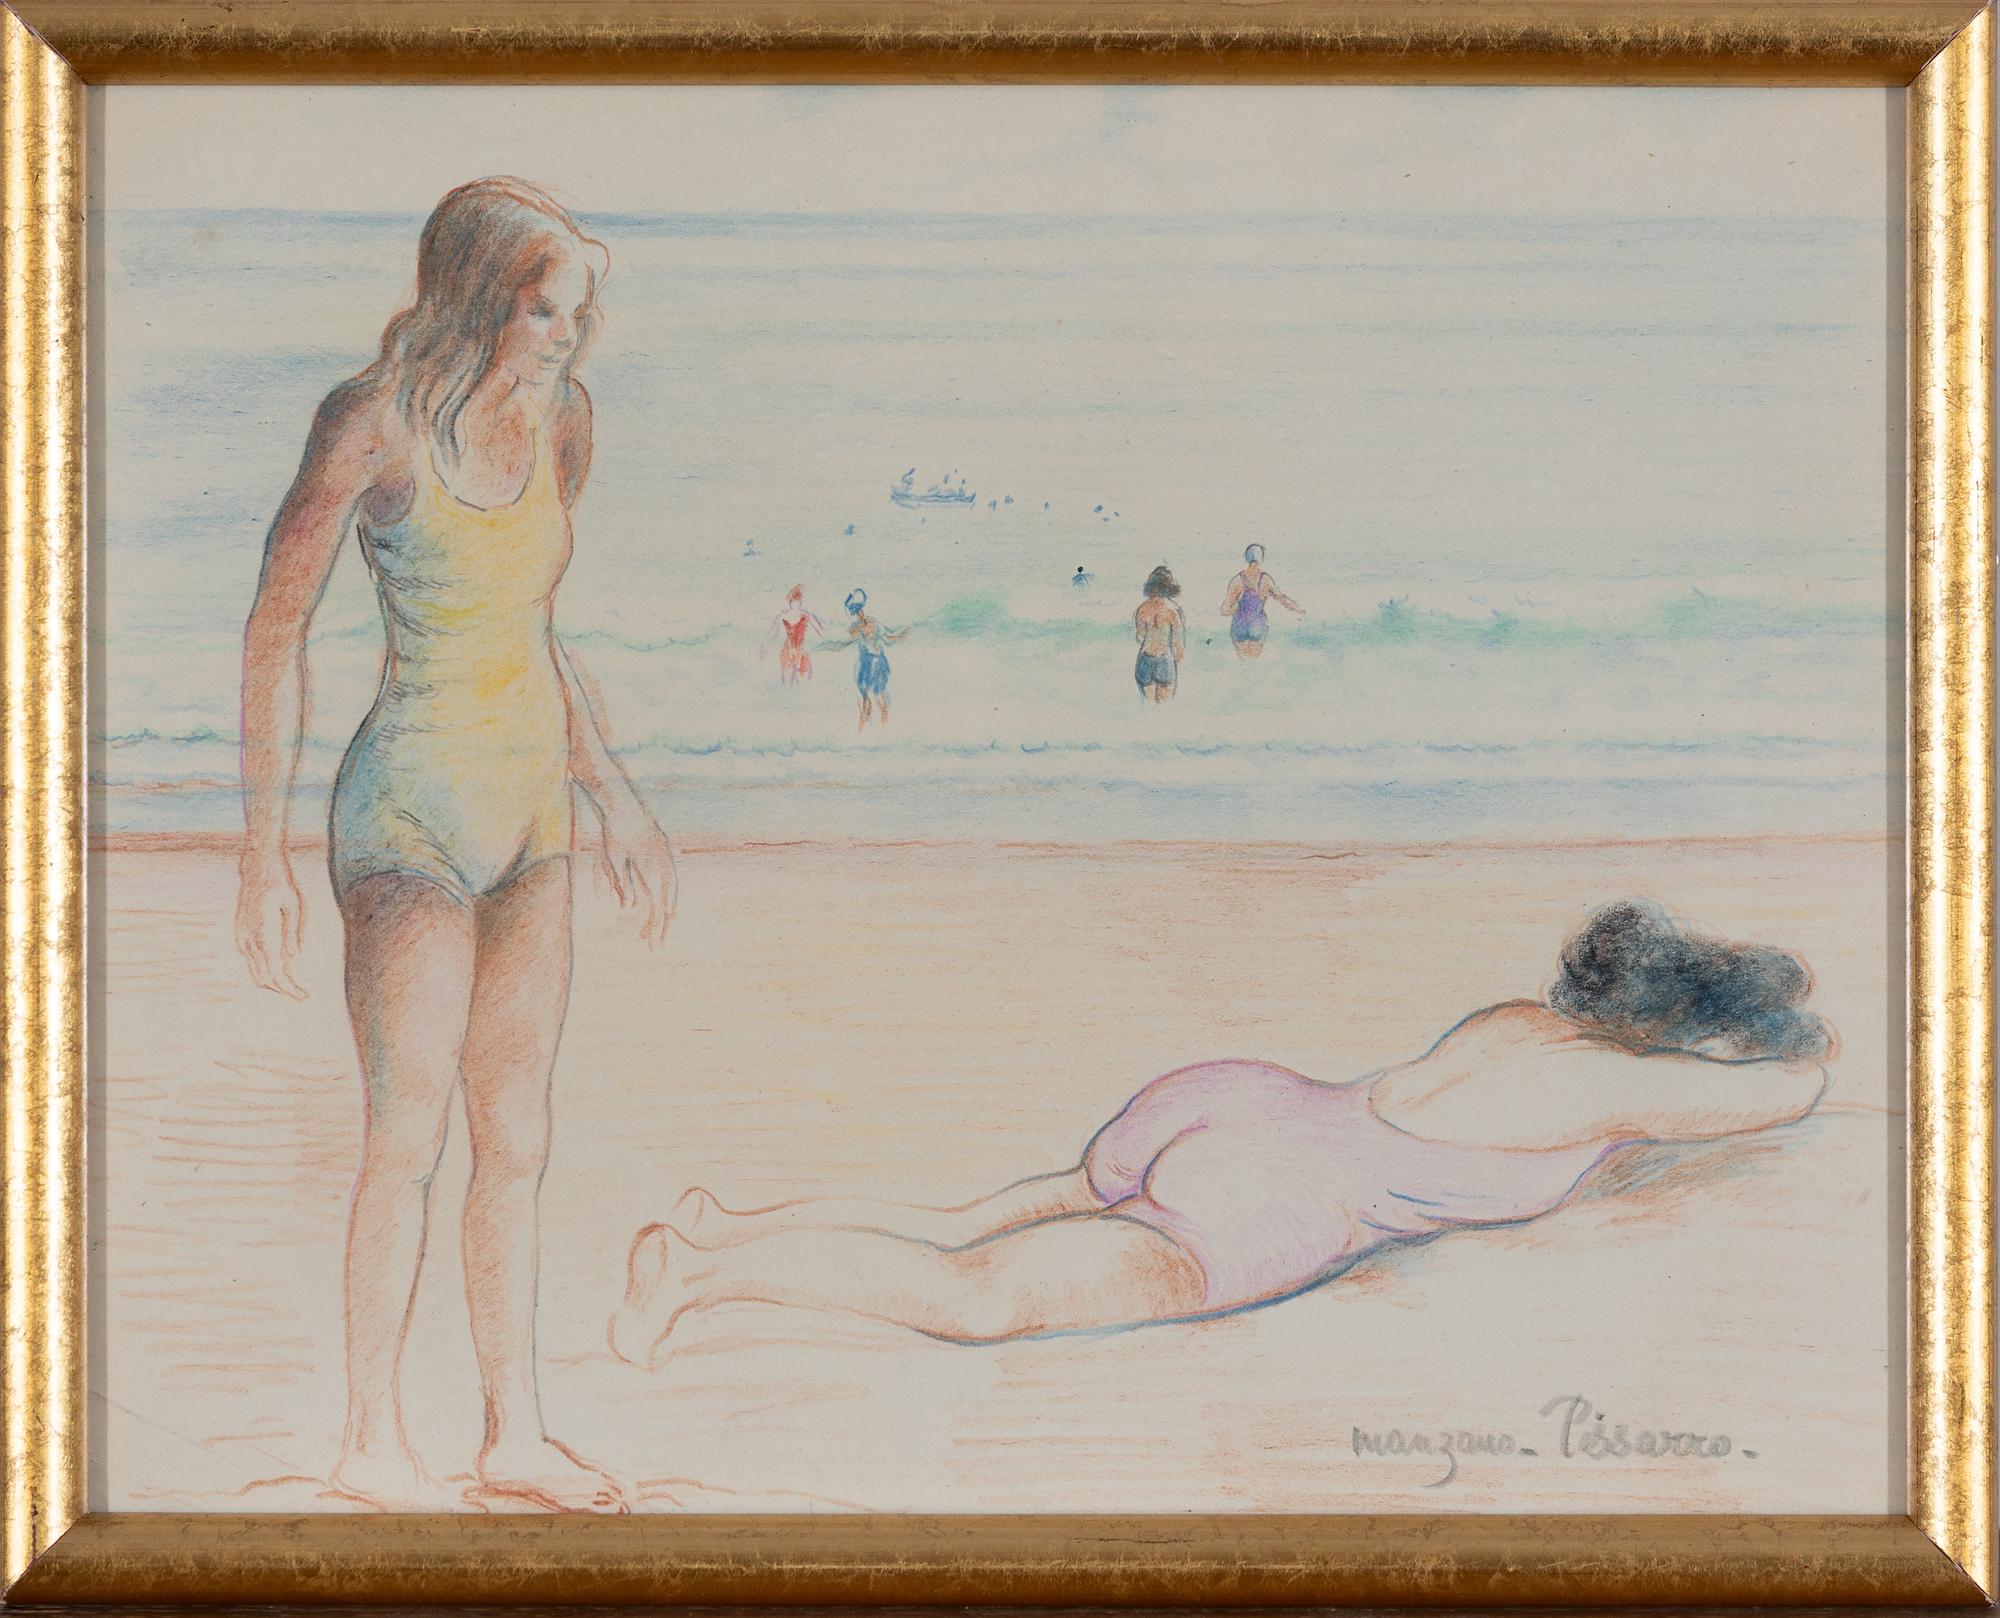 *UK BUYERS WILL PAY AN ADDITIONAL 20% VAT ON TOP OF THE ABOVE PRICE

Two Figures by the Sea by Georges Manzana Pissarro (1871 - 1961)
Colour crayon and pencil on paper
20.3 x 26 cm (8 x 10 ¼ inches)
Signed lower right, Manzana Pissarro

Executed in